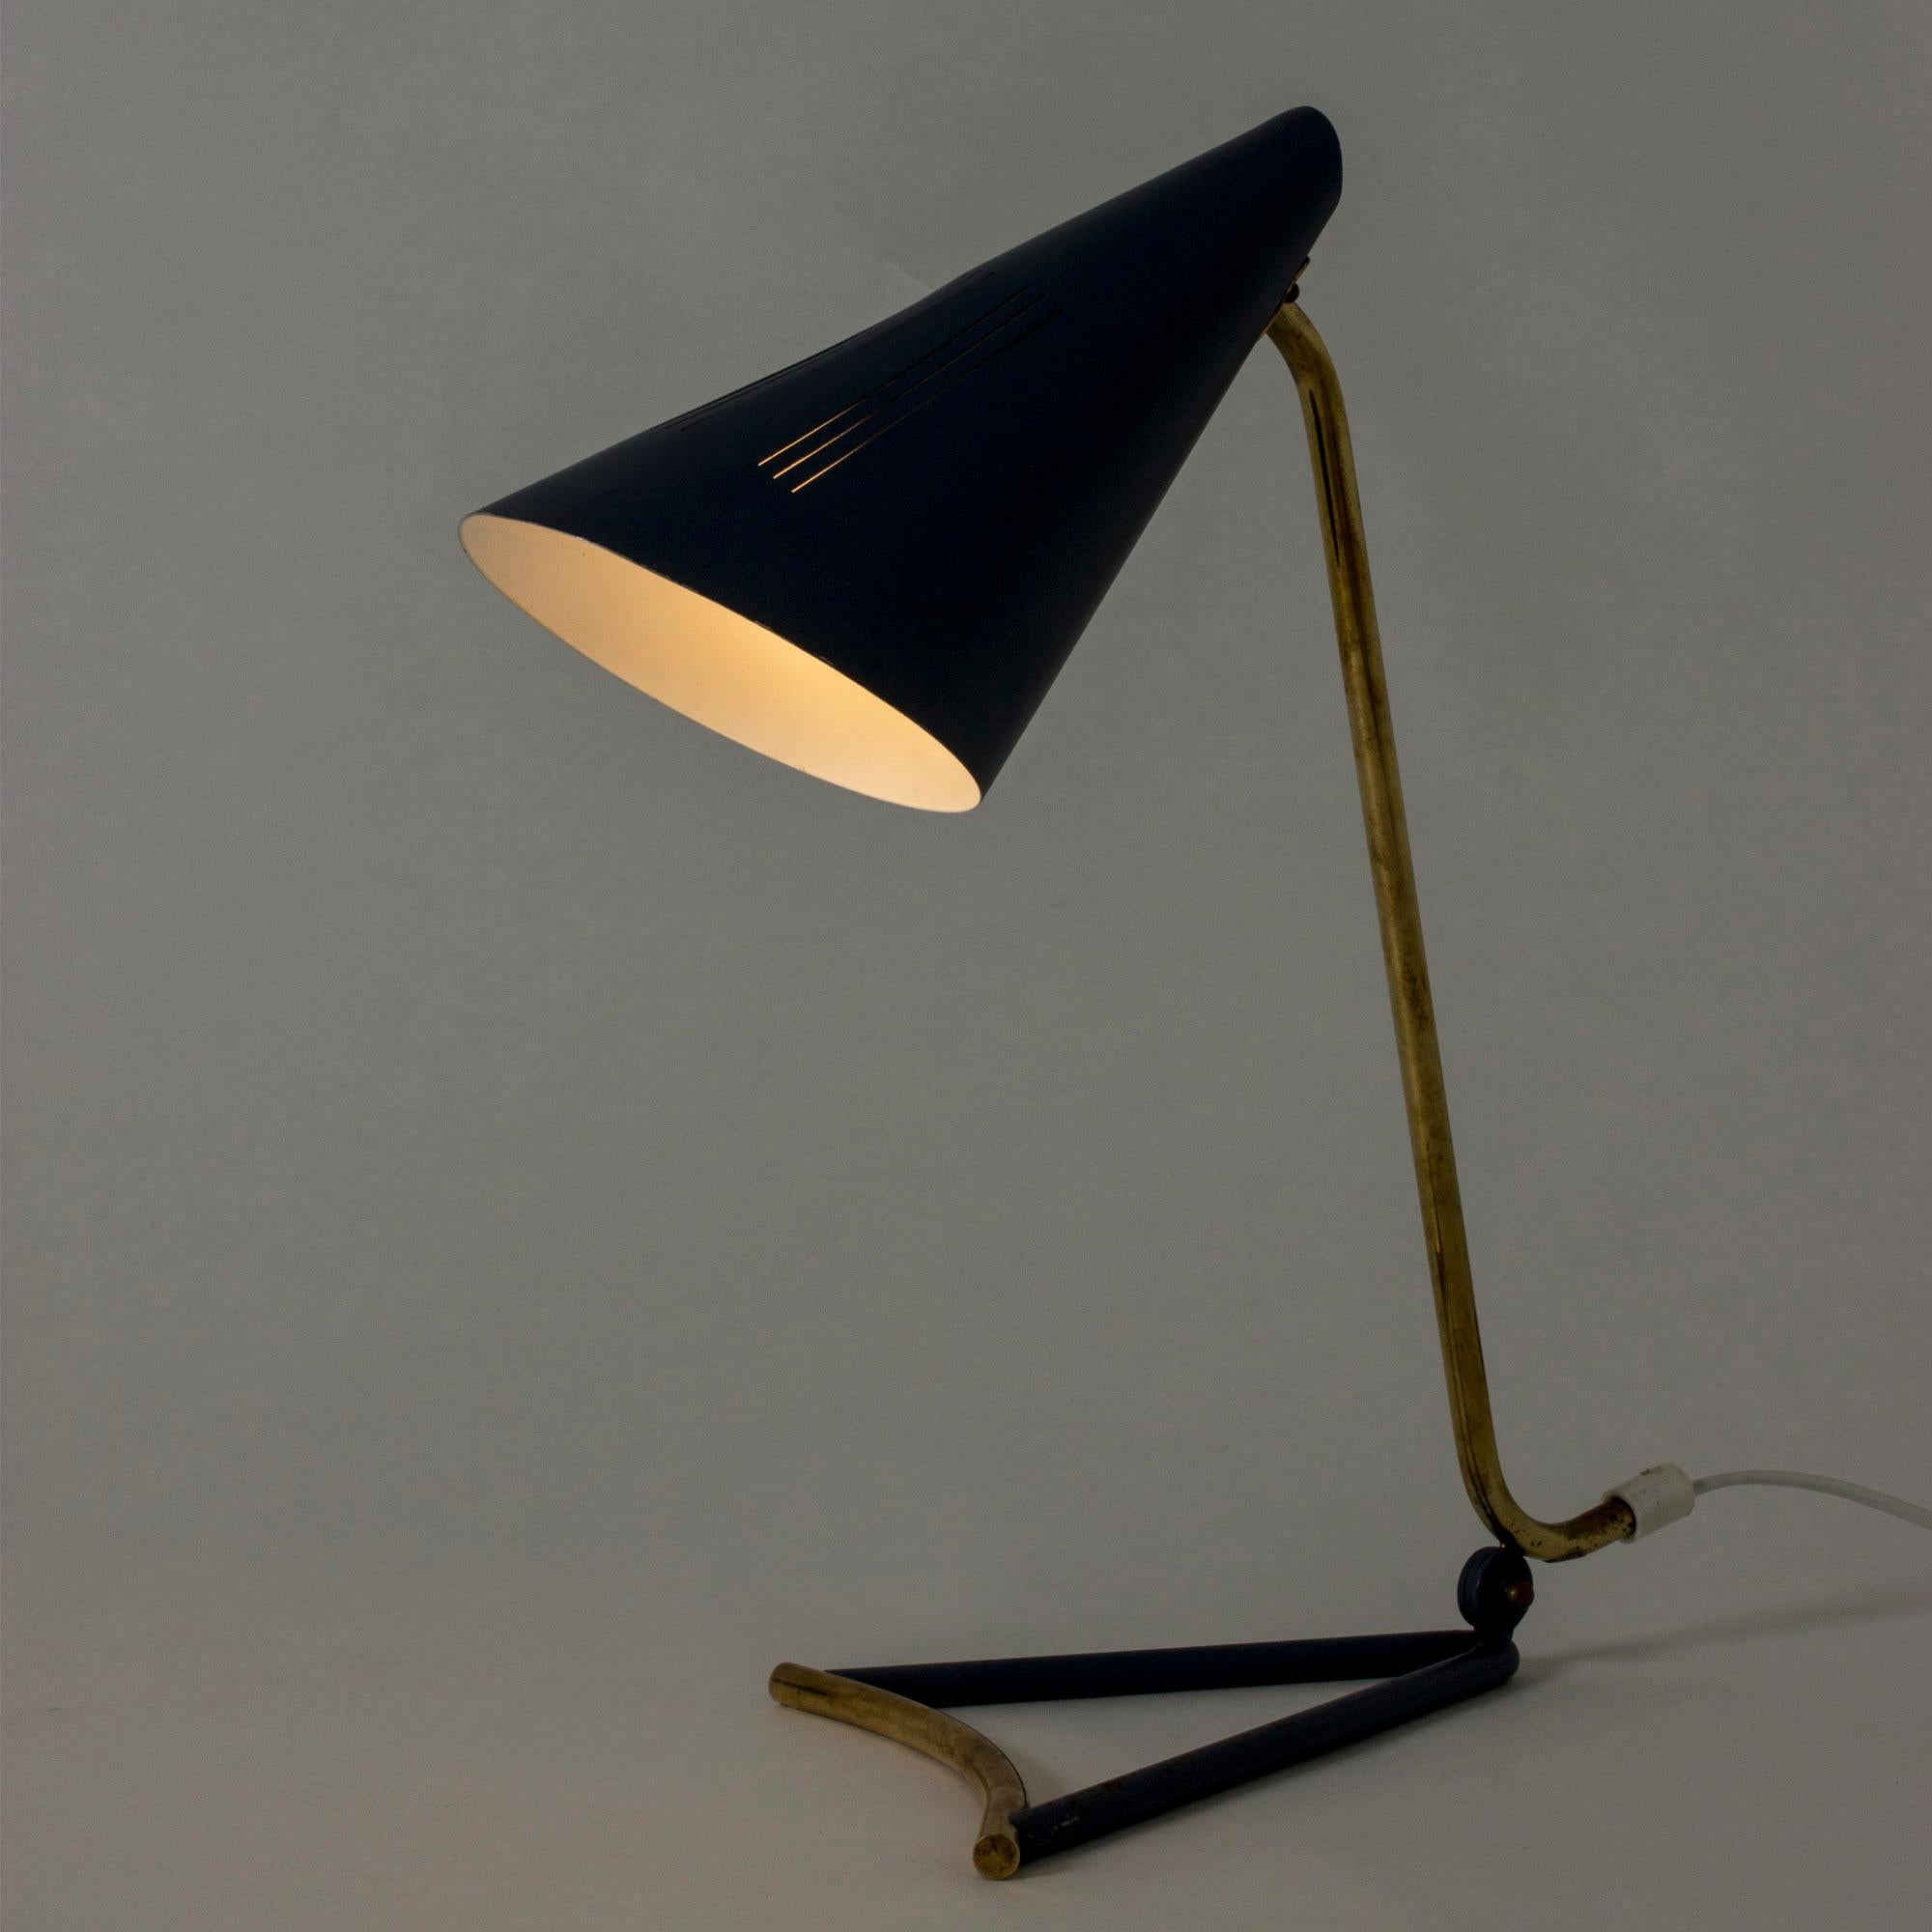 Danish Lacquered Metal Table Lamp by Knud Joos for Lyfa, Denmark, 1950s